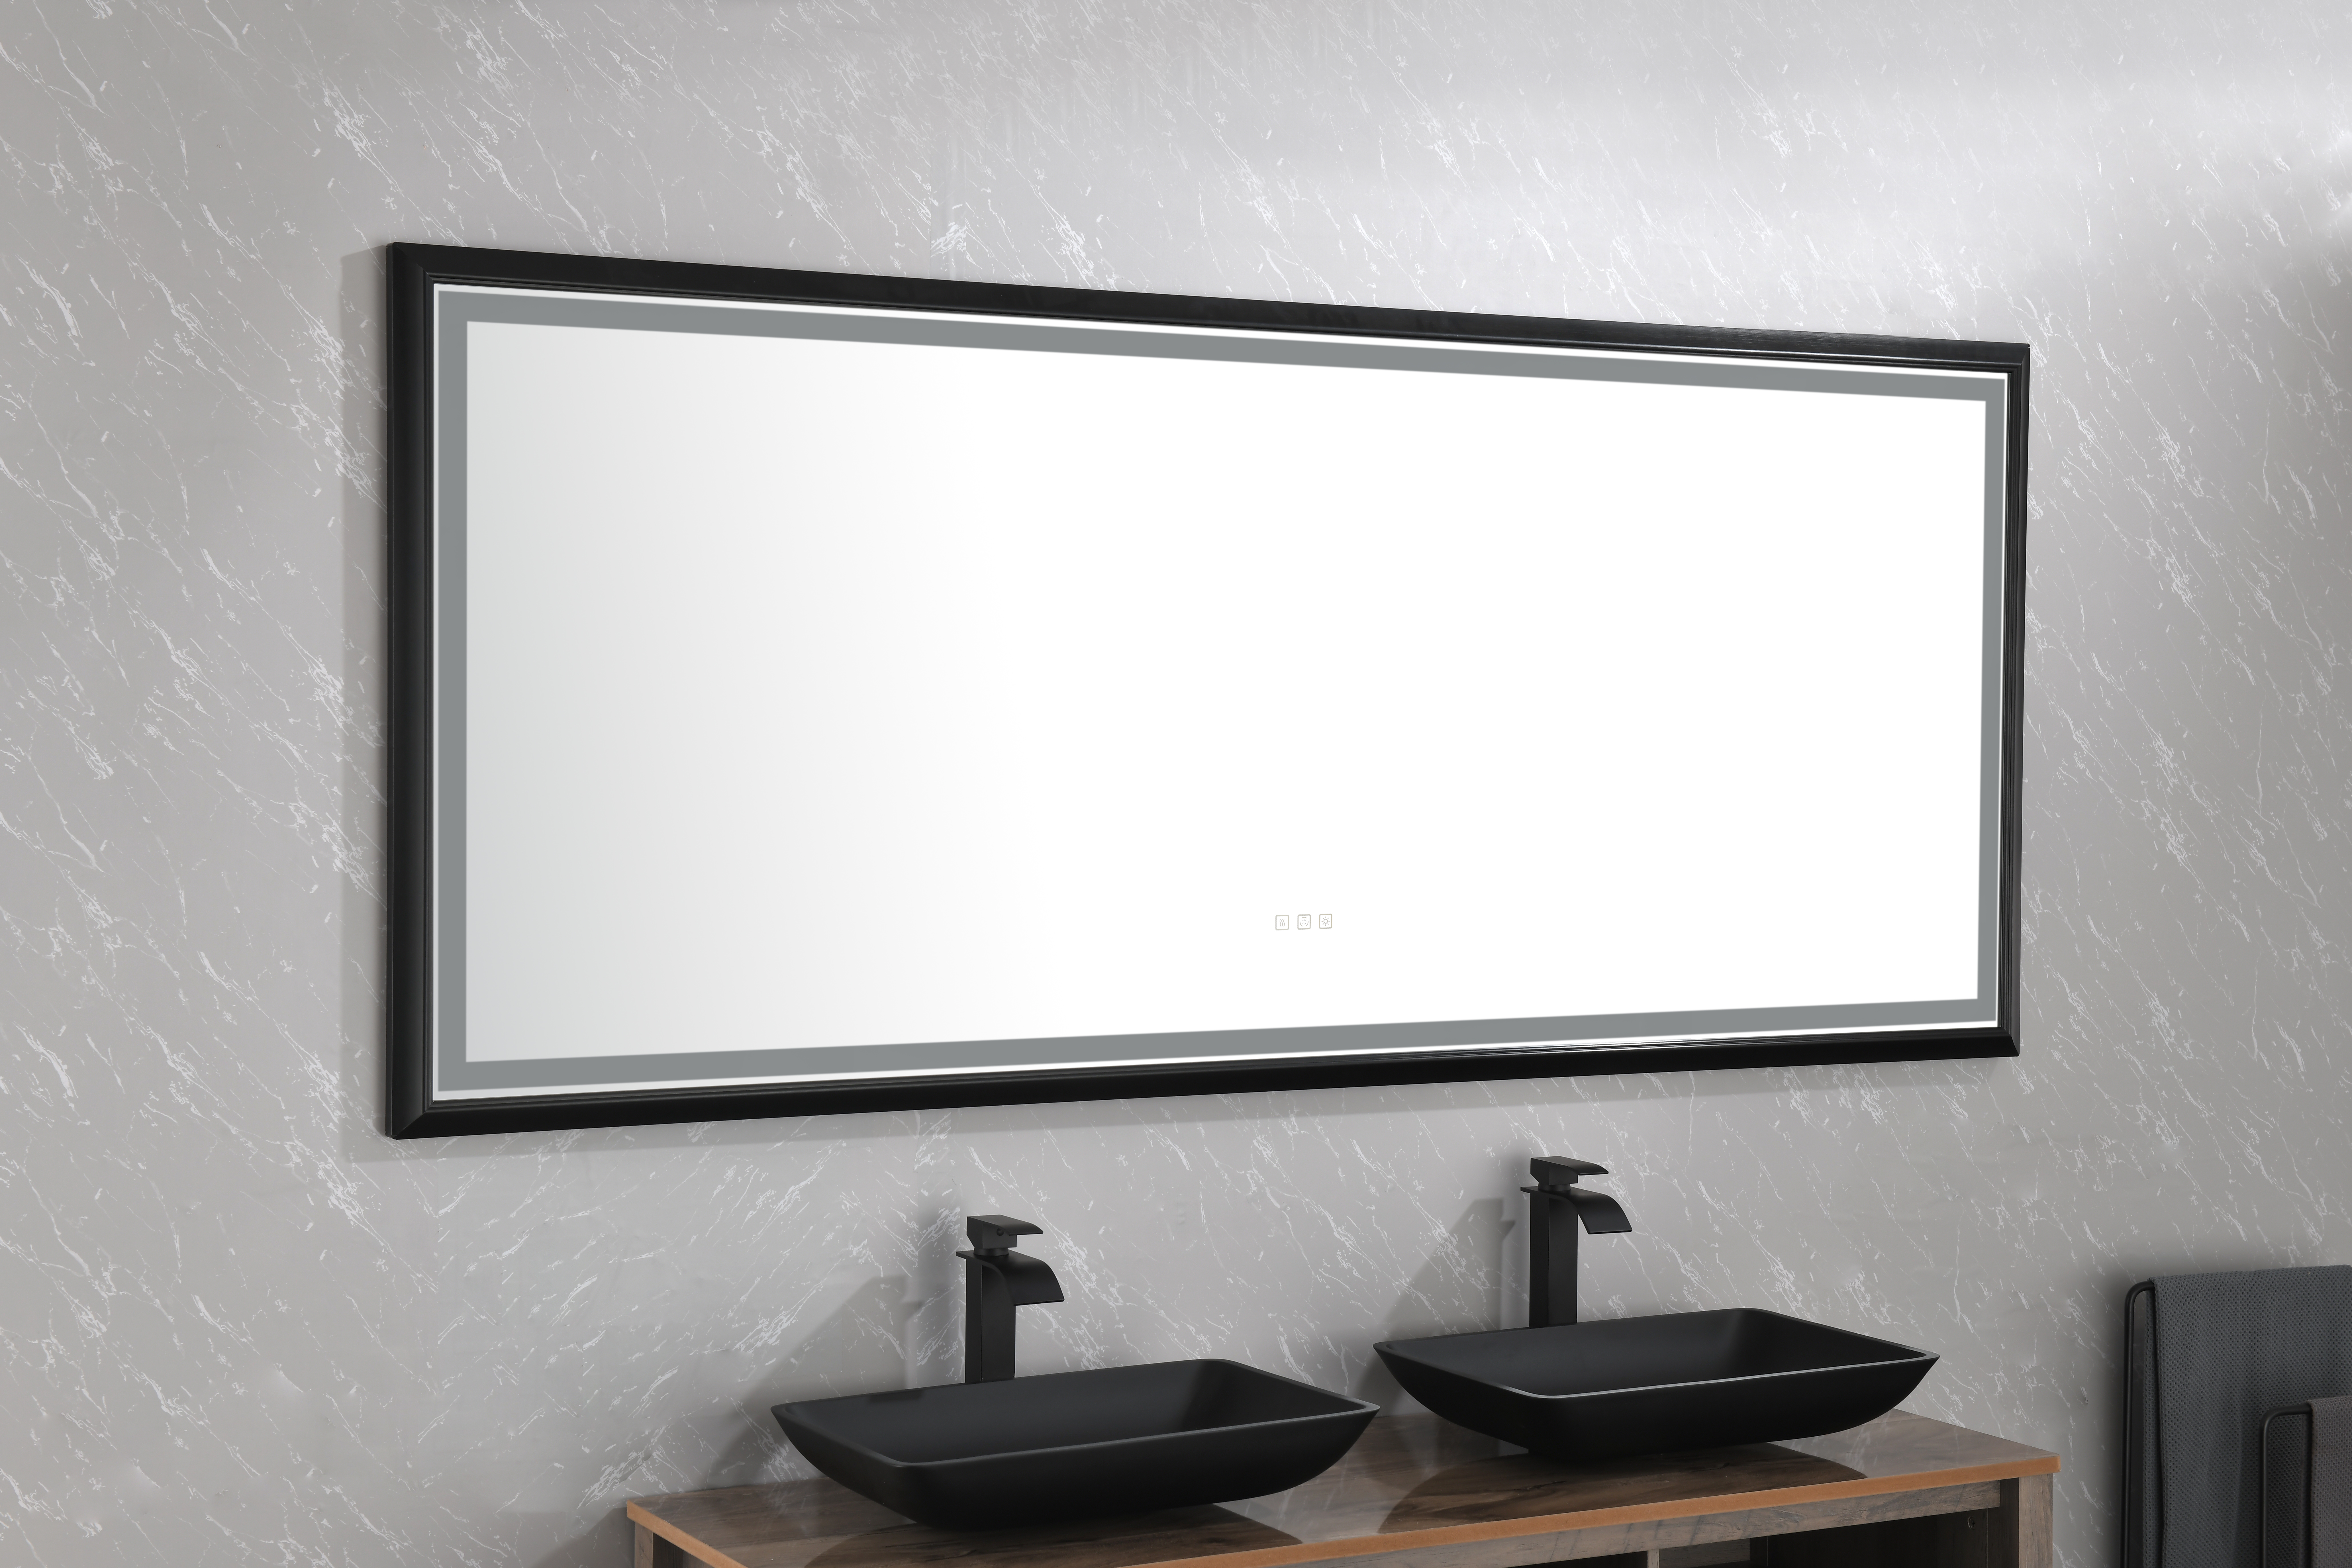 88 in. W x 38 in. H Oversized Rectangular Black Framed LED Mirror Anti-Fog Dimmable Wall Mount Bathroom Vanity Mirror \\\\n\\\\nHD Wall Mirror Kit For Gym And Dance Studio 38 X 88Inches With Safety Ba-CASAINC